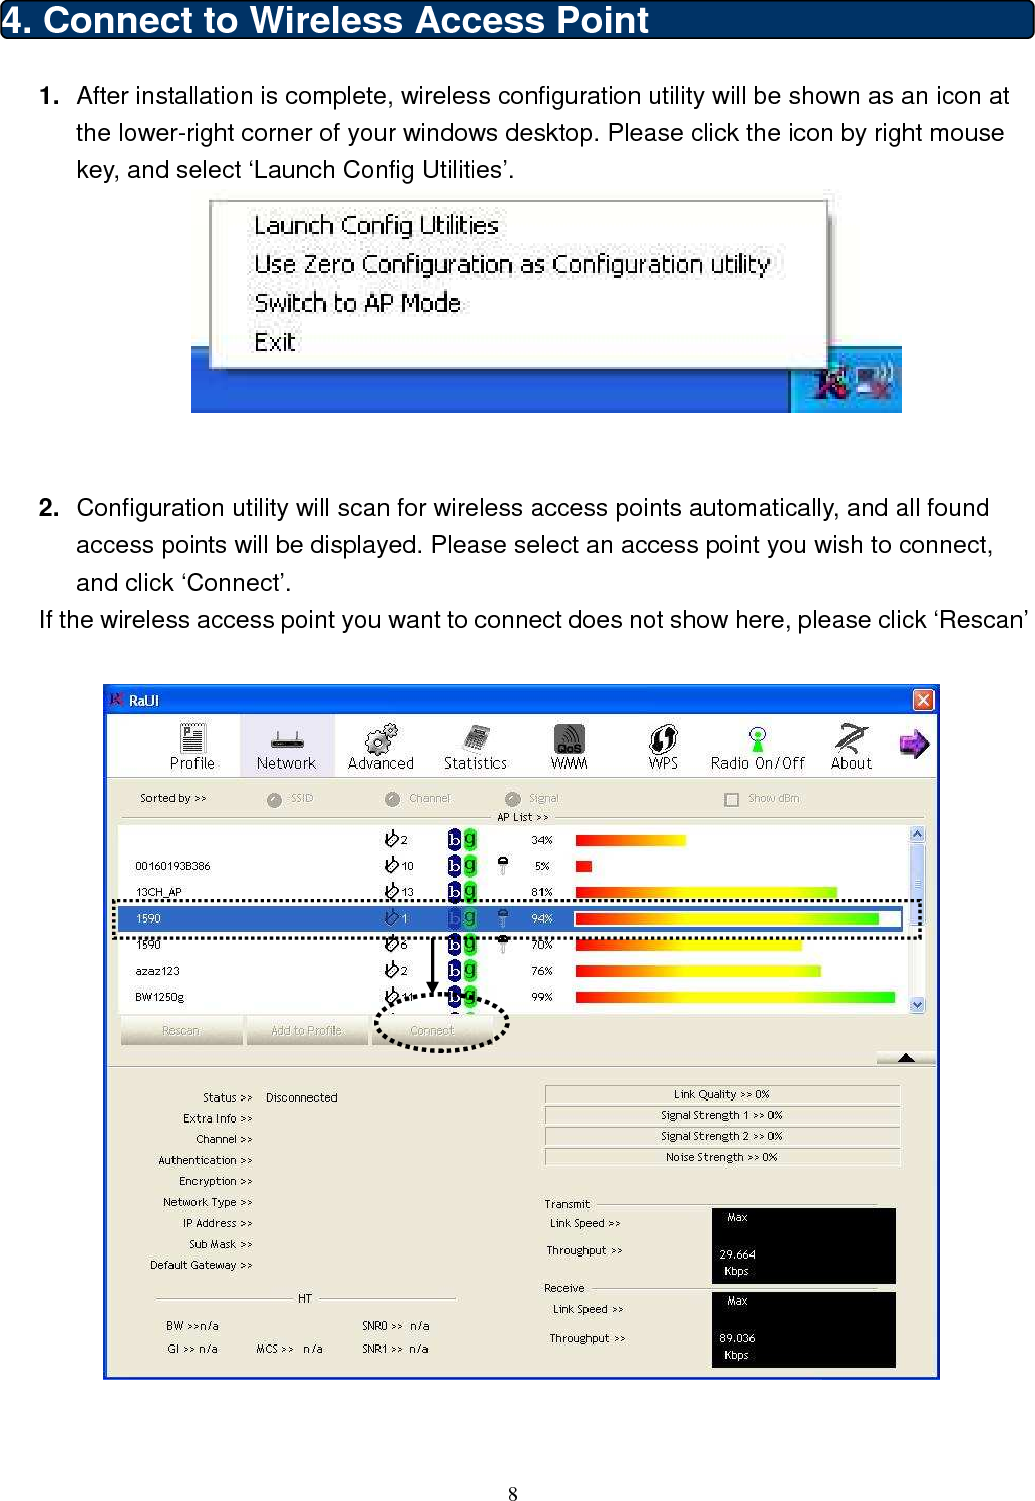  8  4. Connect to Wireless Access Point   1.  After installation is complete, wireless configuration utility will be shown as an icon at the lower-right corner of your windows desktop. Please click the icon by right mouse key, and select ‘Launch Config Utilities’.    2.  Configuration utility will scan for wireless access points automatically, and all found access points will be displayed. Please select an access point you wish to connect, and click ‘Connect’. If the wireless access point you want to connect does not show here, please click ‘Rescan’    